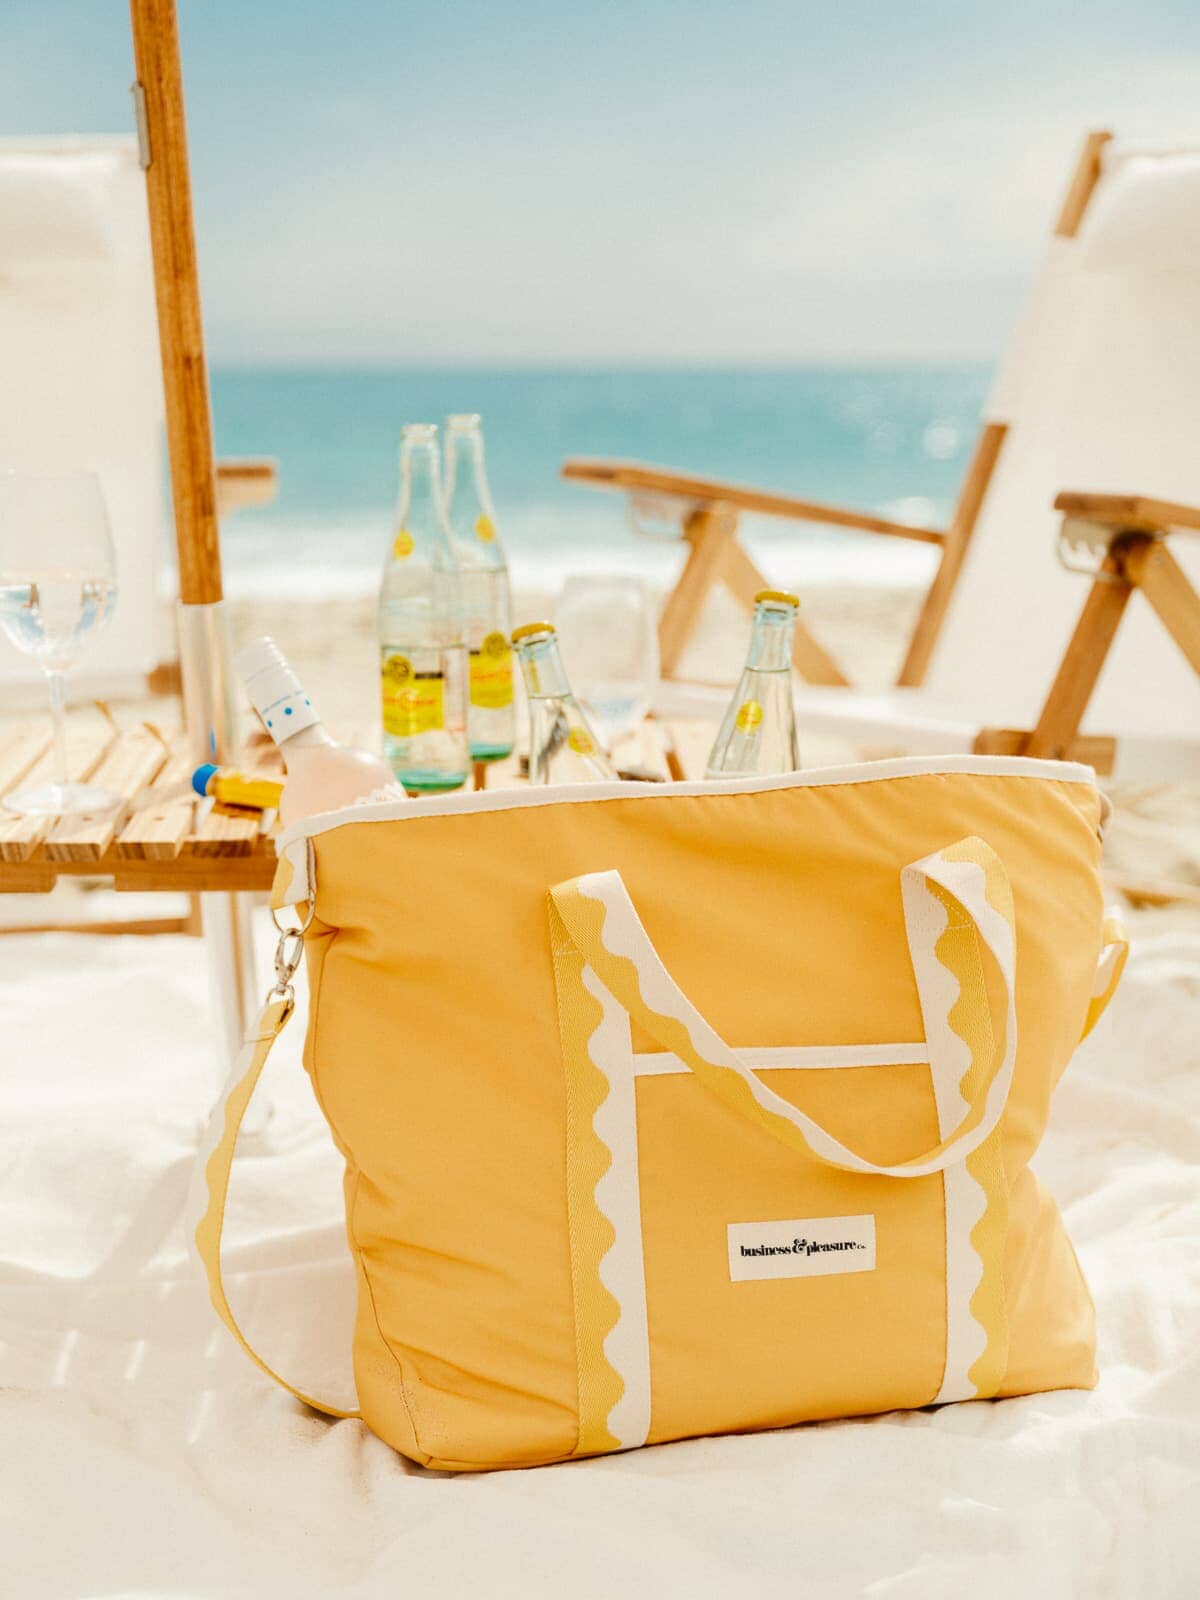 The Cooler Tote Bag - Rivie Mimosa Cooler Tote Business & Pleasure Co Aus 